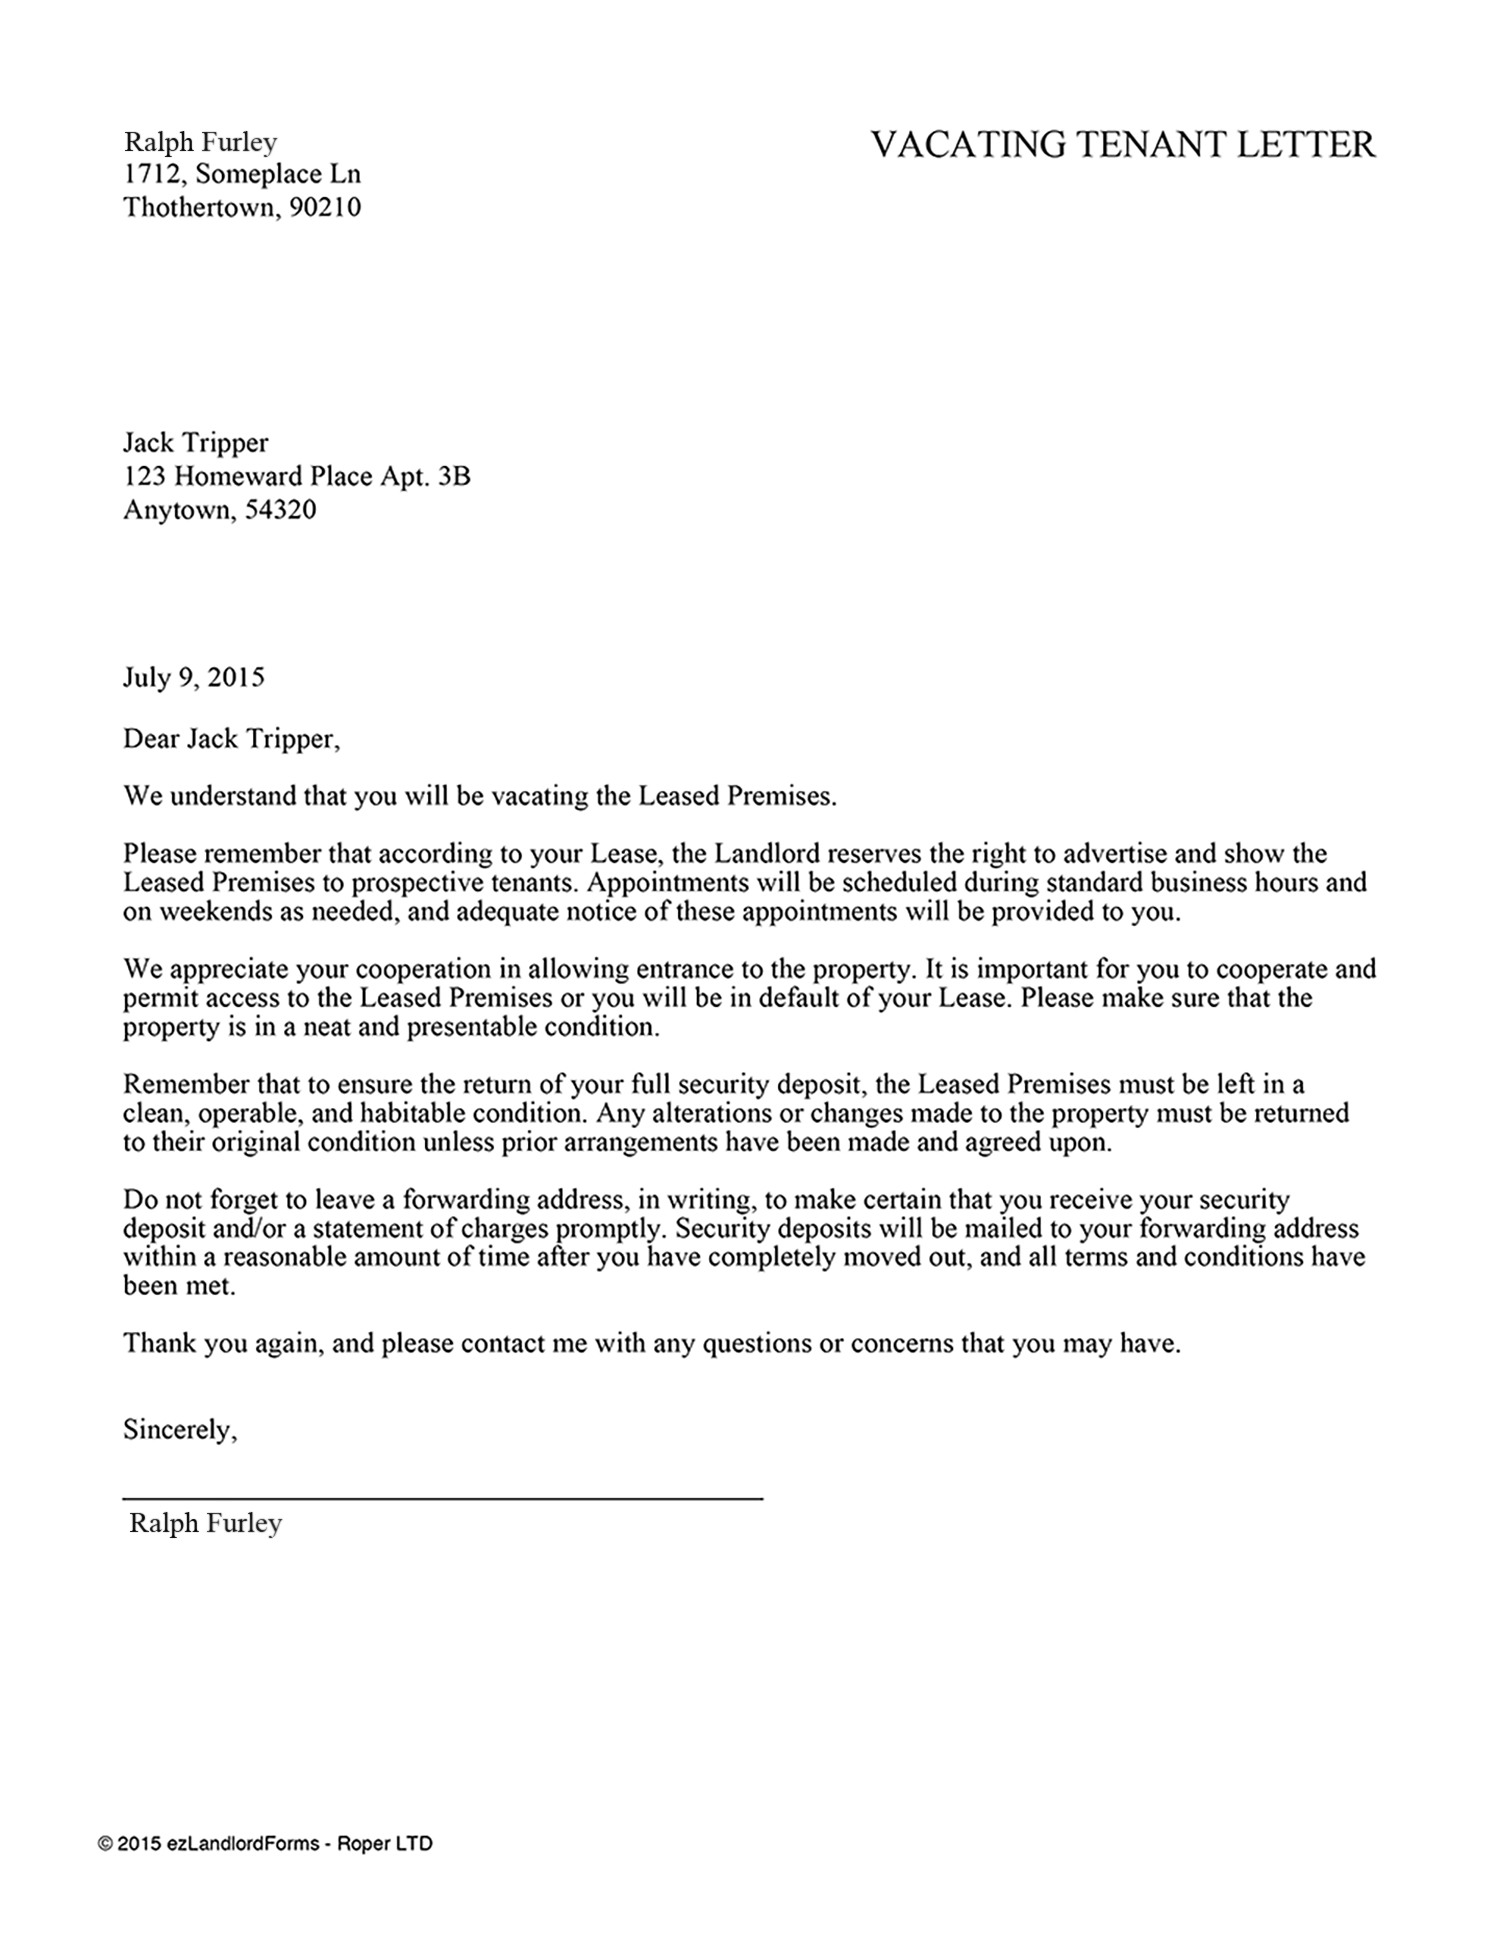 Letter To Tenant To Vacate Rental Property - Property Walls